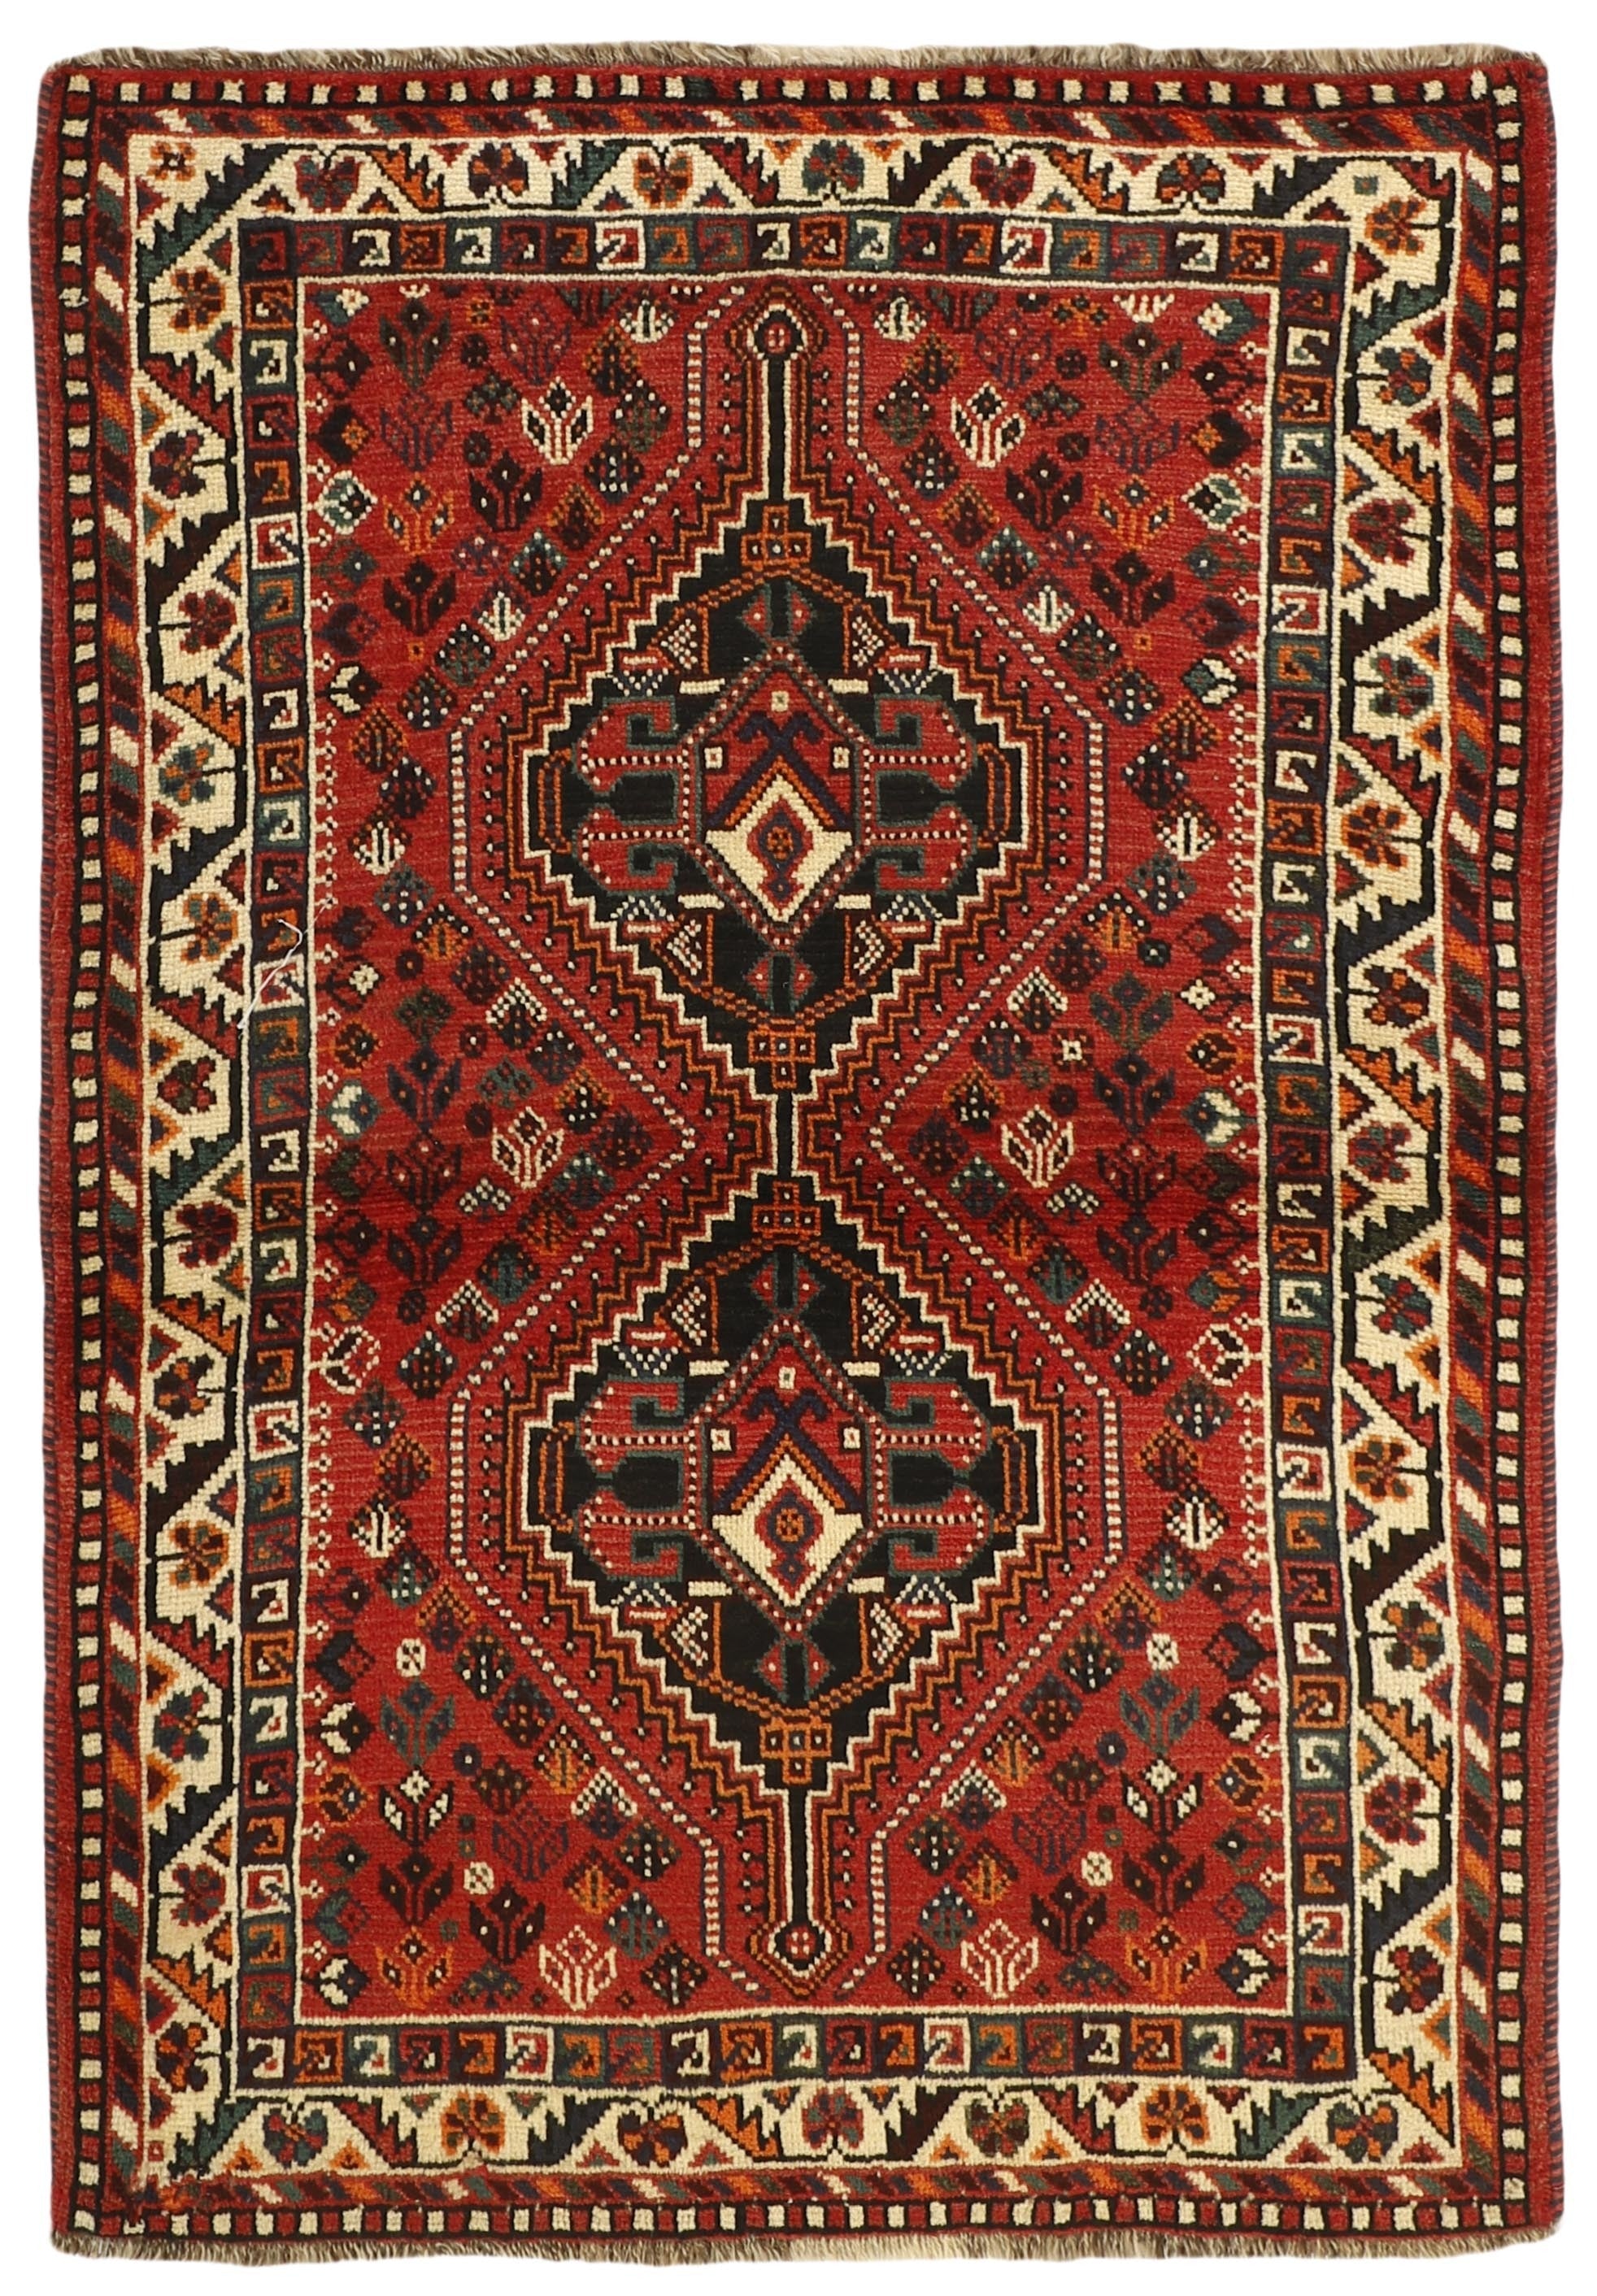 Authentic persian rug with a traditional tribal geometric pattern in red, ivory and black